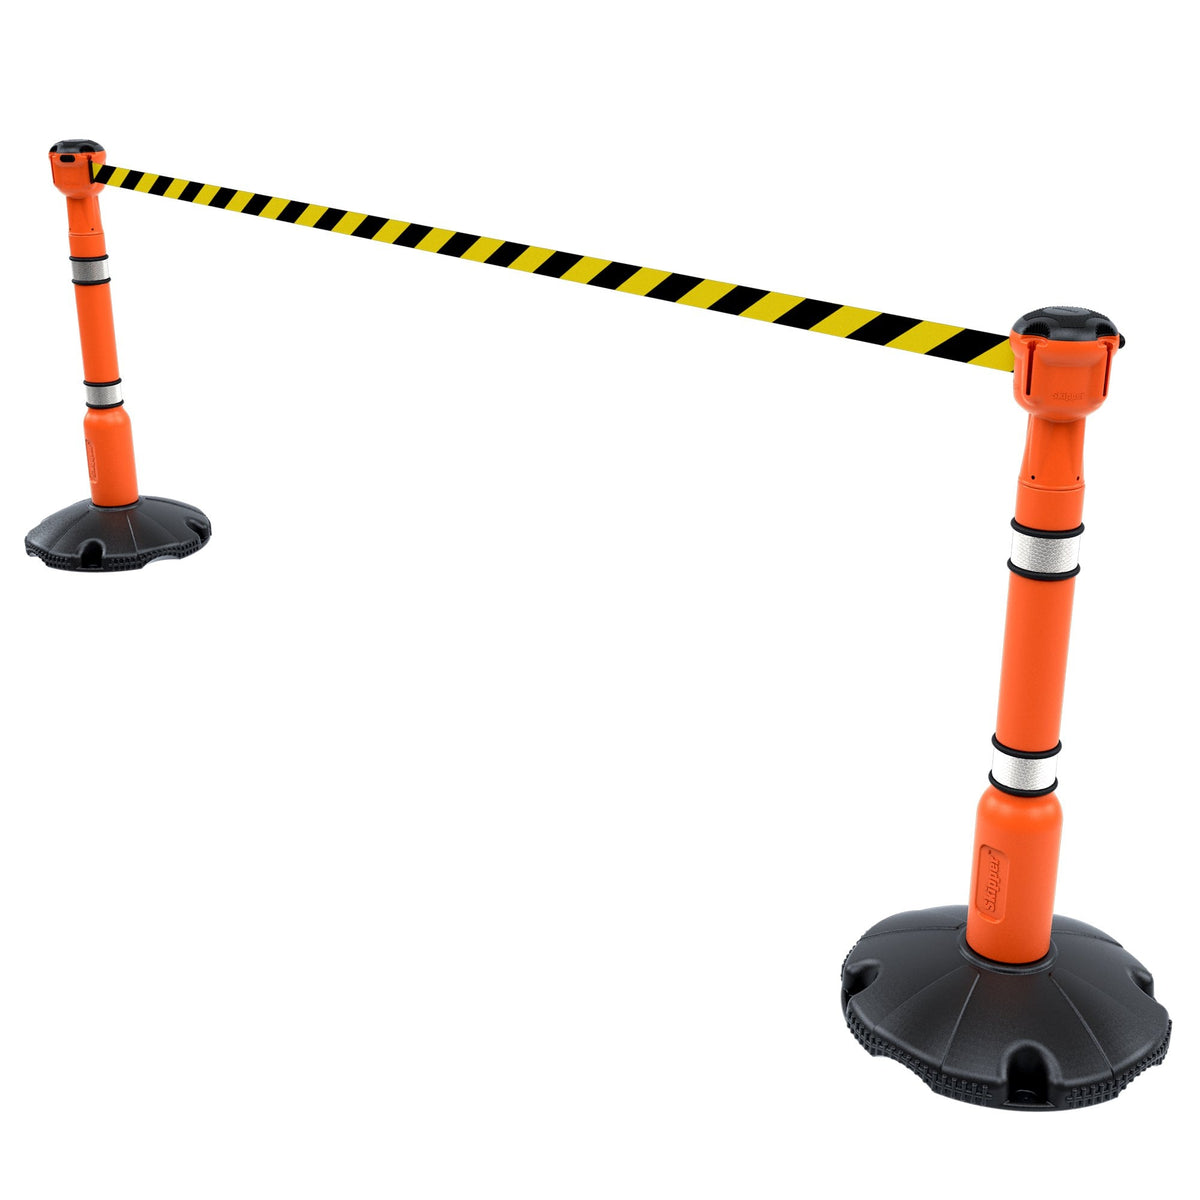 Skipper 9m Retractable Safety Barrier Complete Kit - Kit10 Retractable > Crowd Barrier > Tensa > Skipper One Stop For Safety Orange Black & Yellow Chevron 